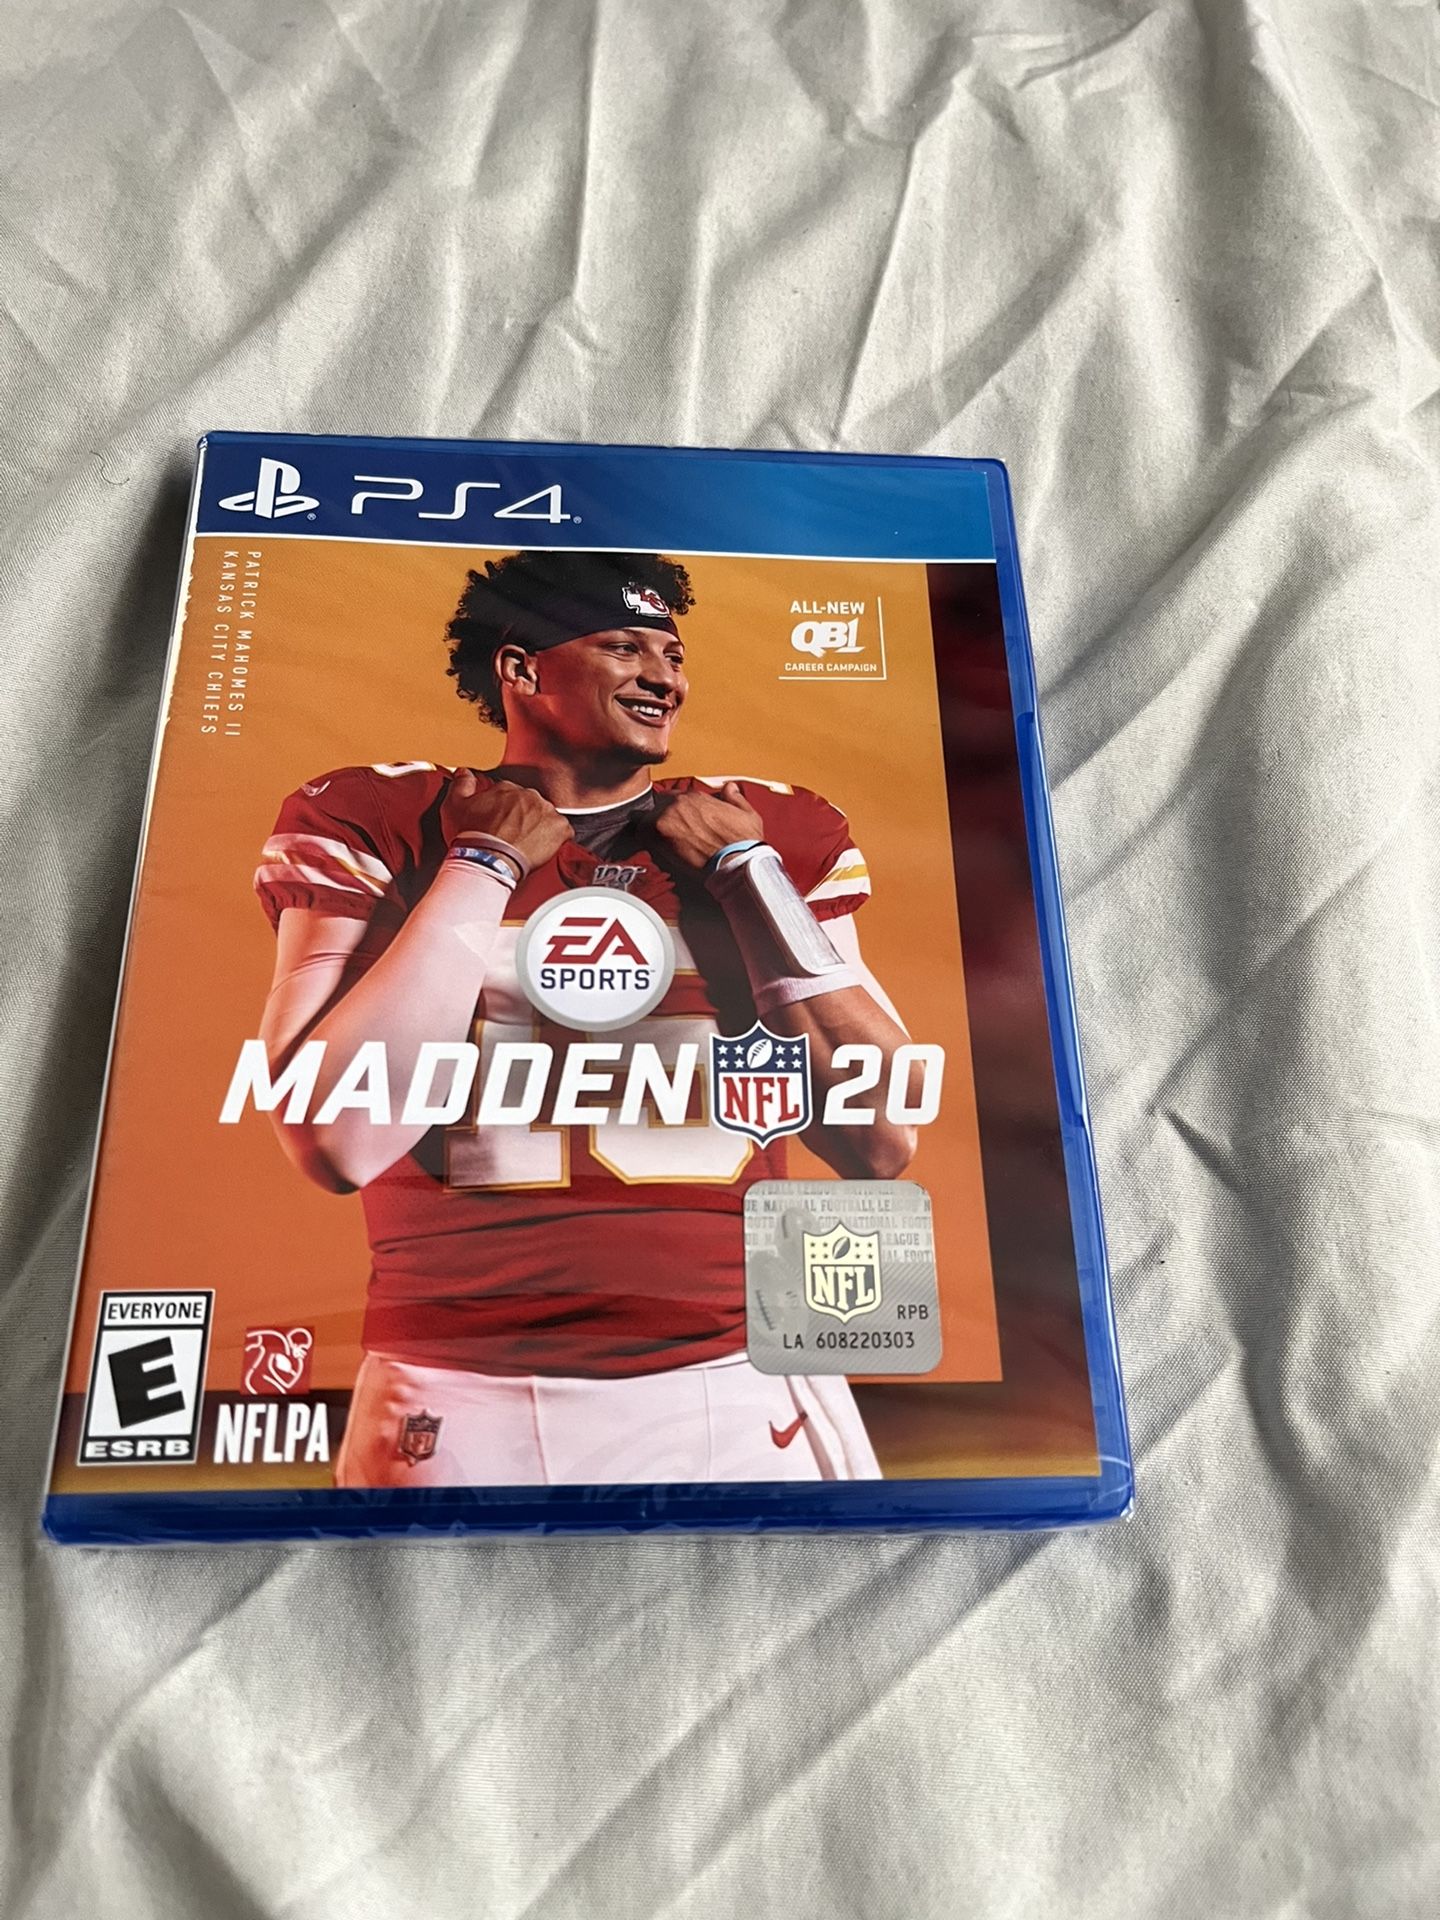 NFL 20 (PS4) (Can Play On Ps5) for Sale NJ - OfferUp